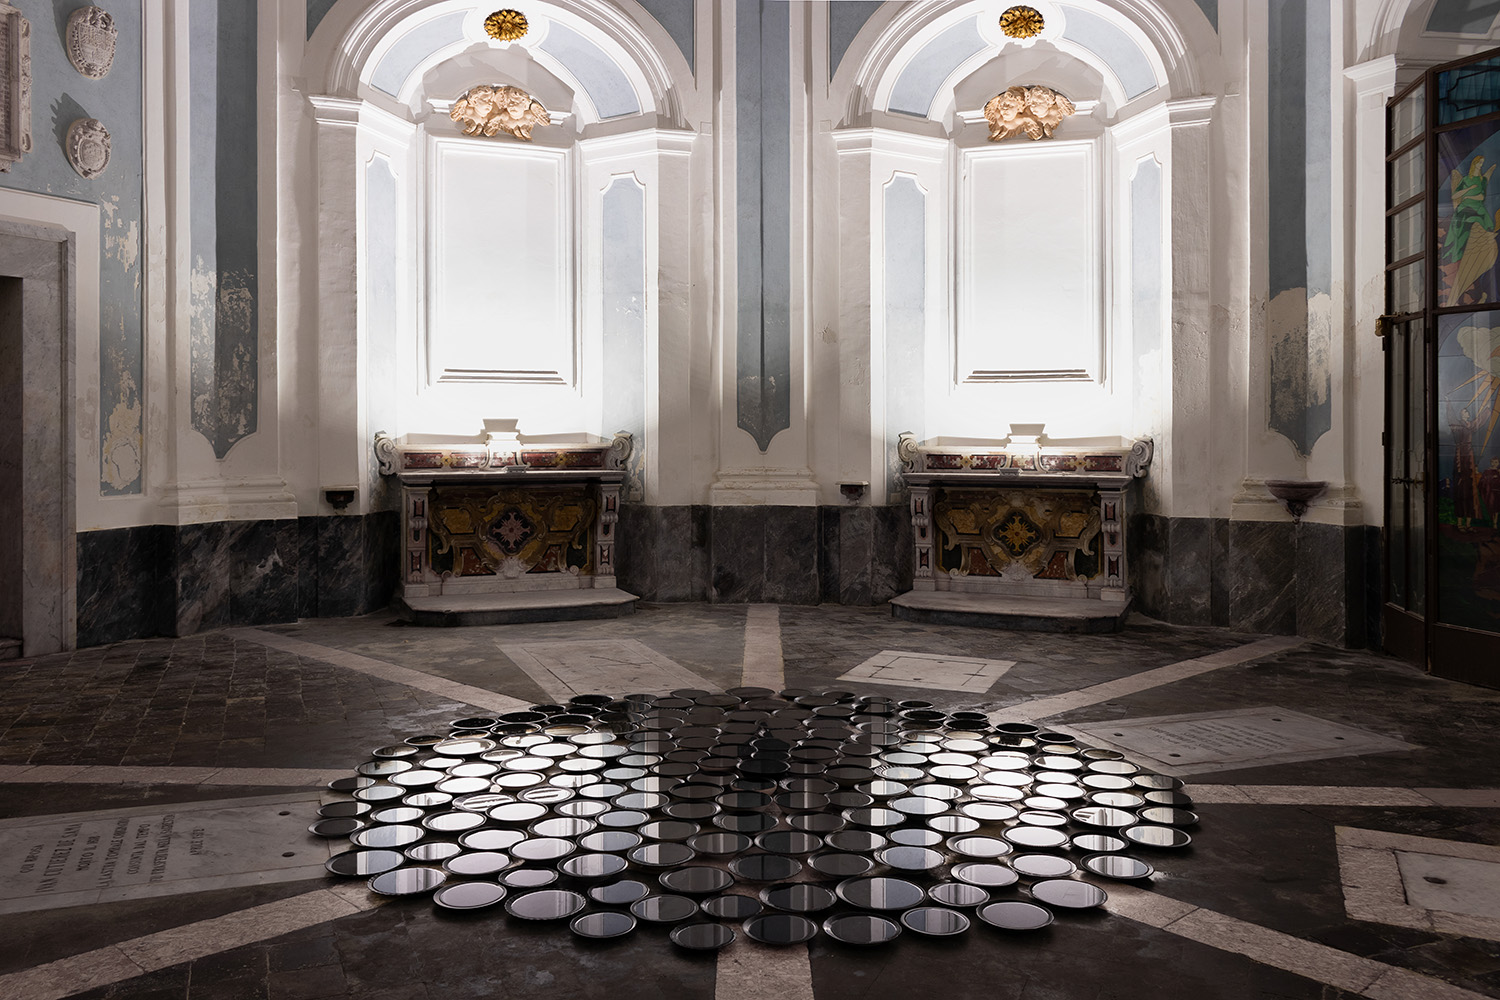 the reflection in the water inside black plates shows a baroque church